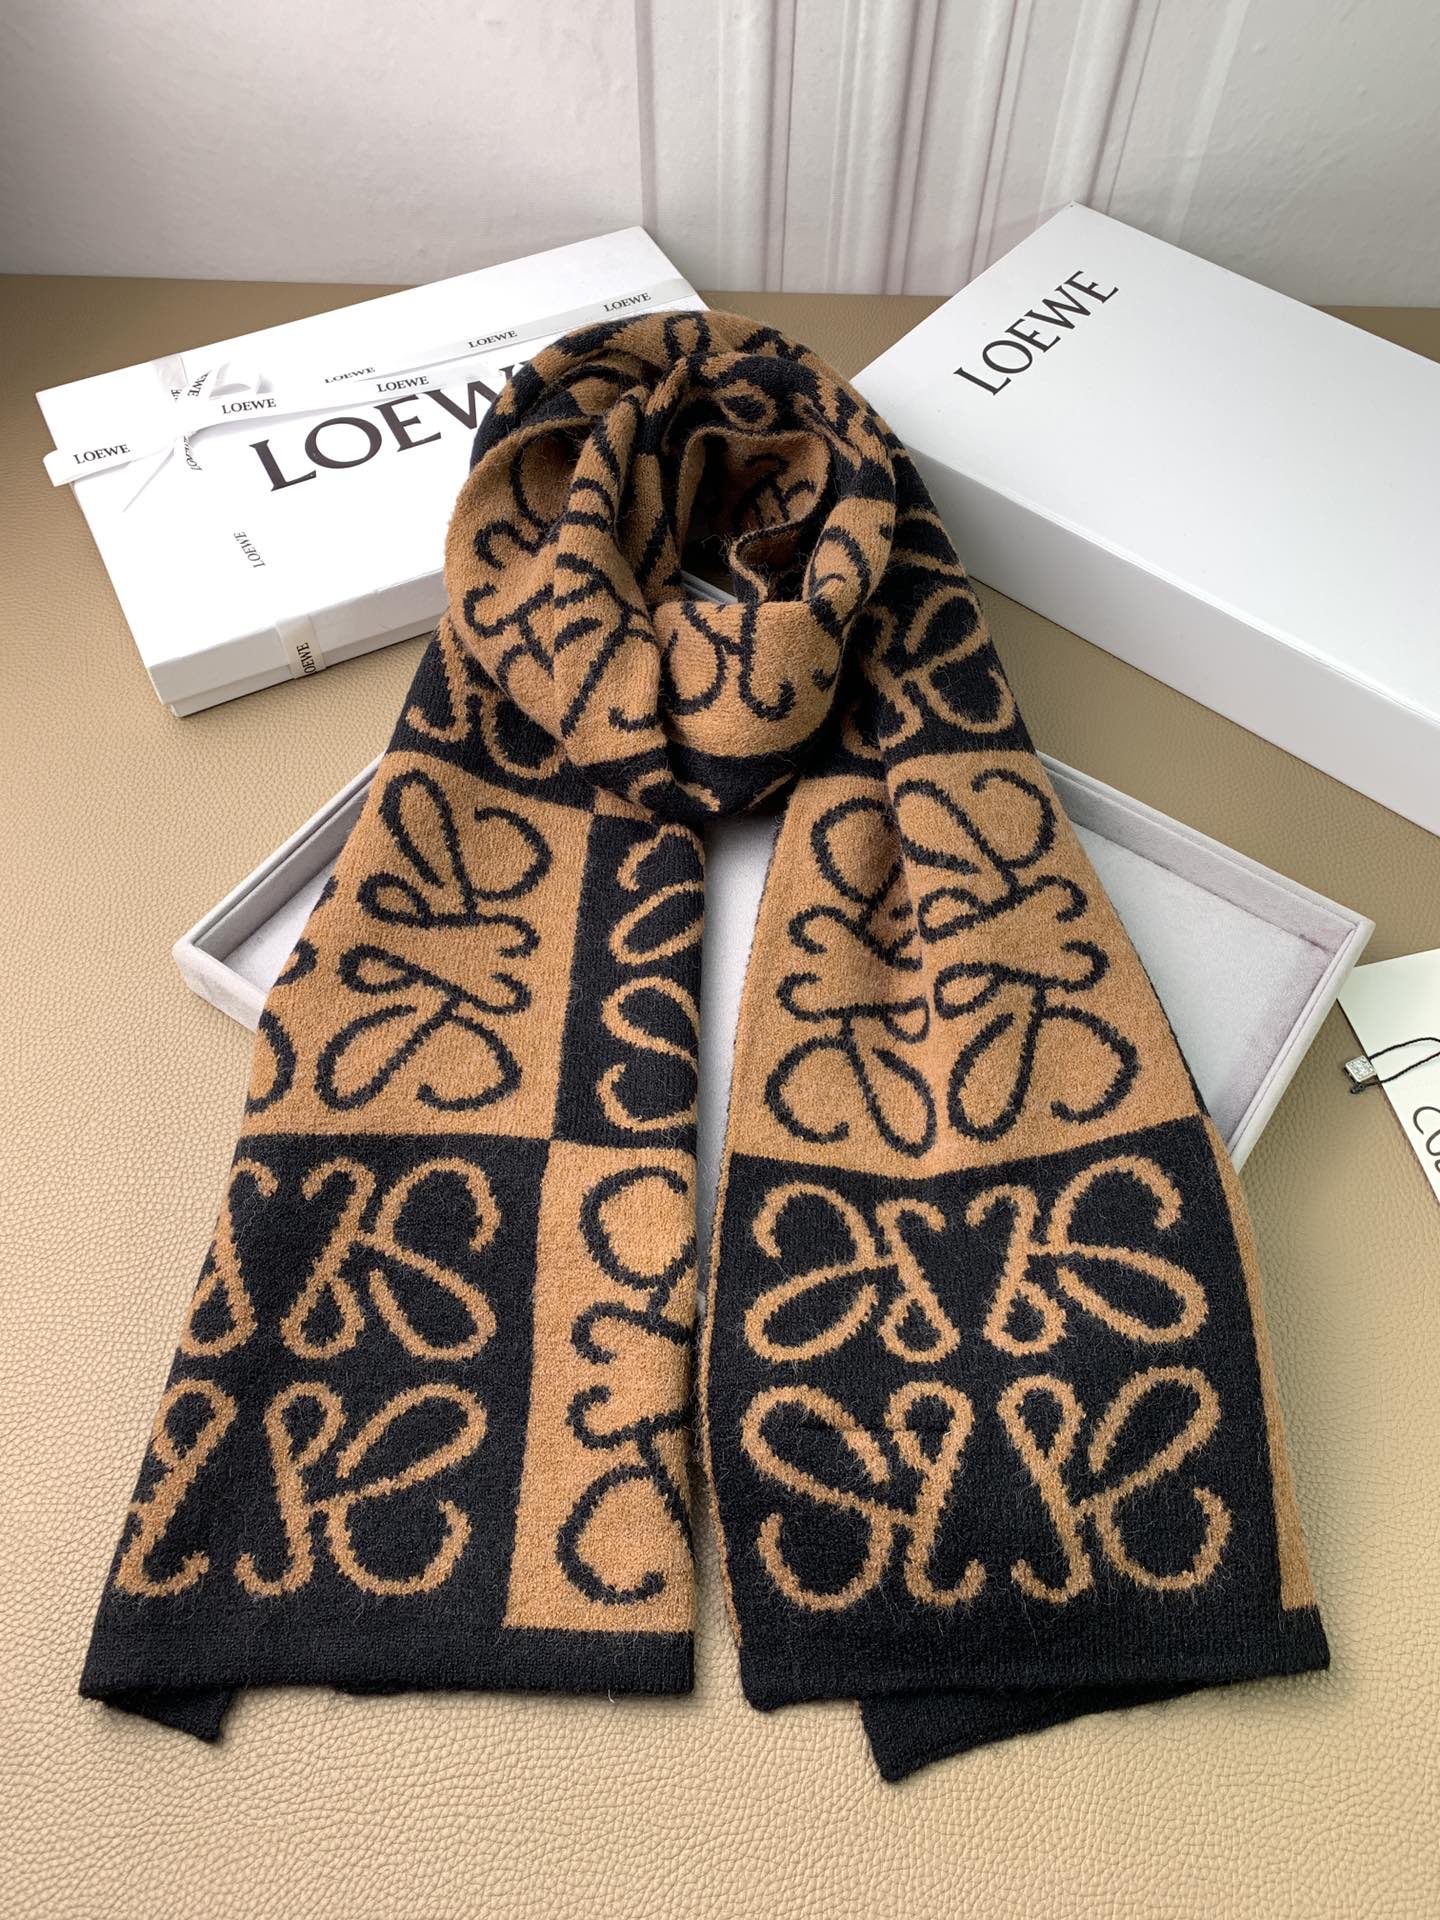 Loewe Cashmere Scarf  # 274139, cheap Loewe Scarf, only $45!